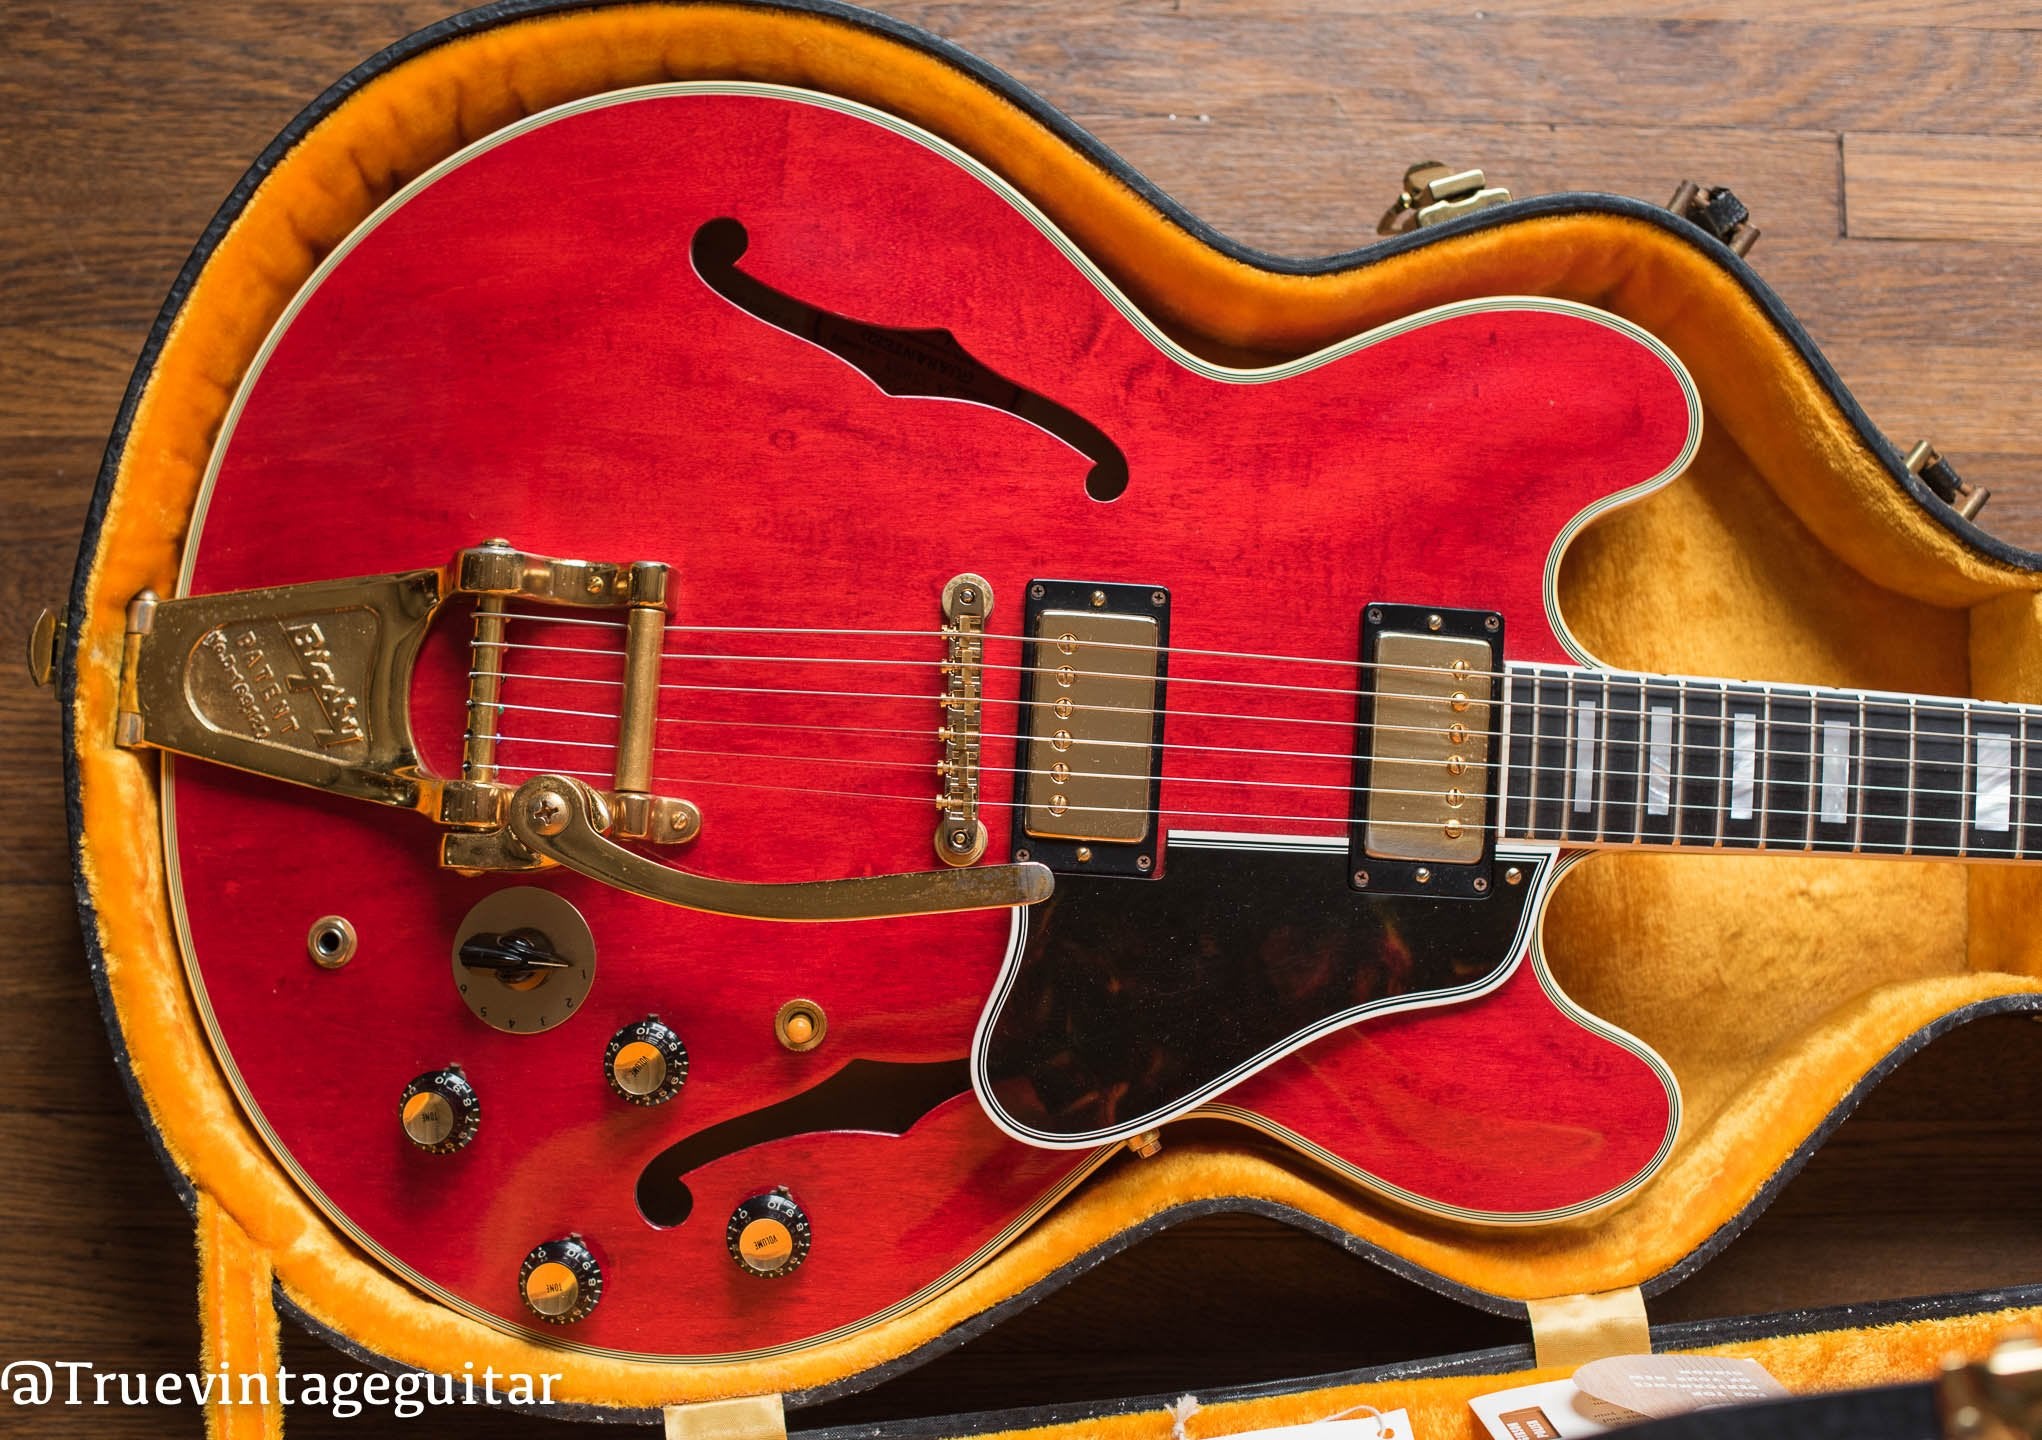 Vintage 1960 Gibson ES-355 cherry red electric guitar